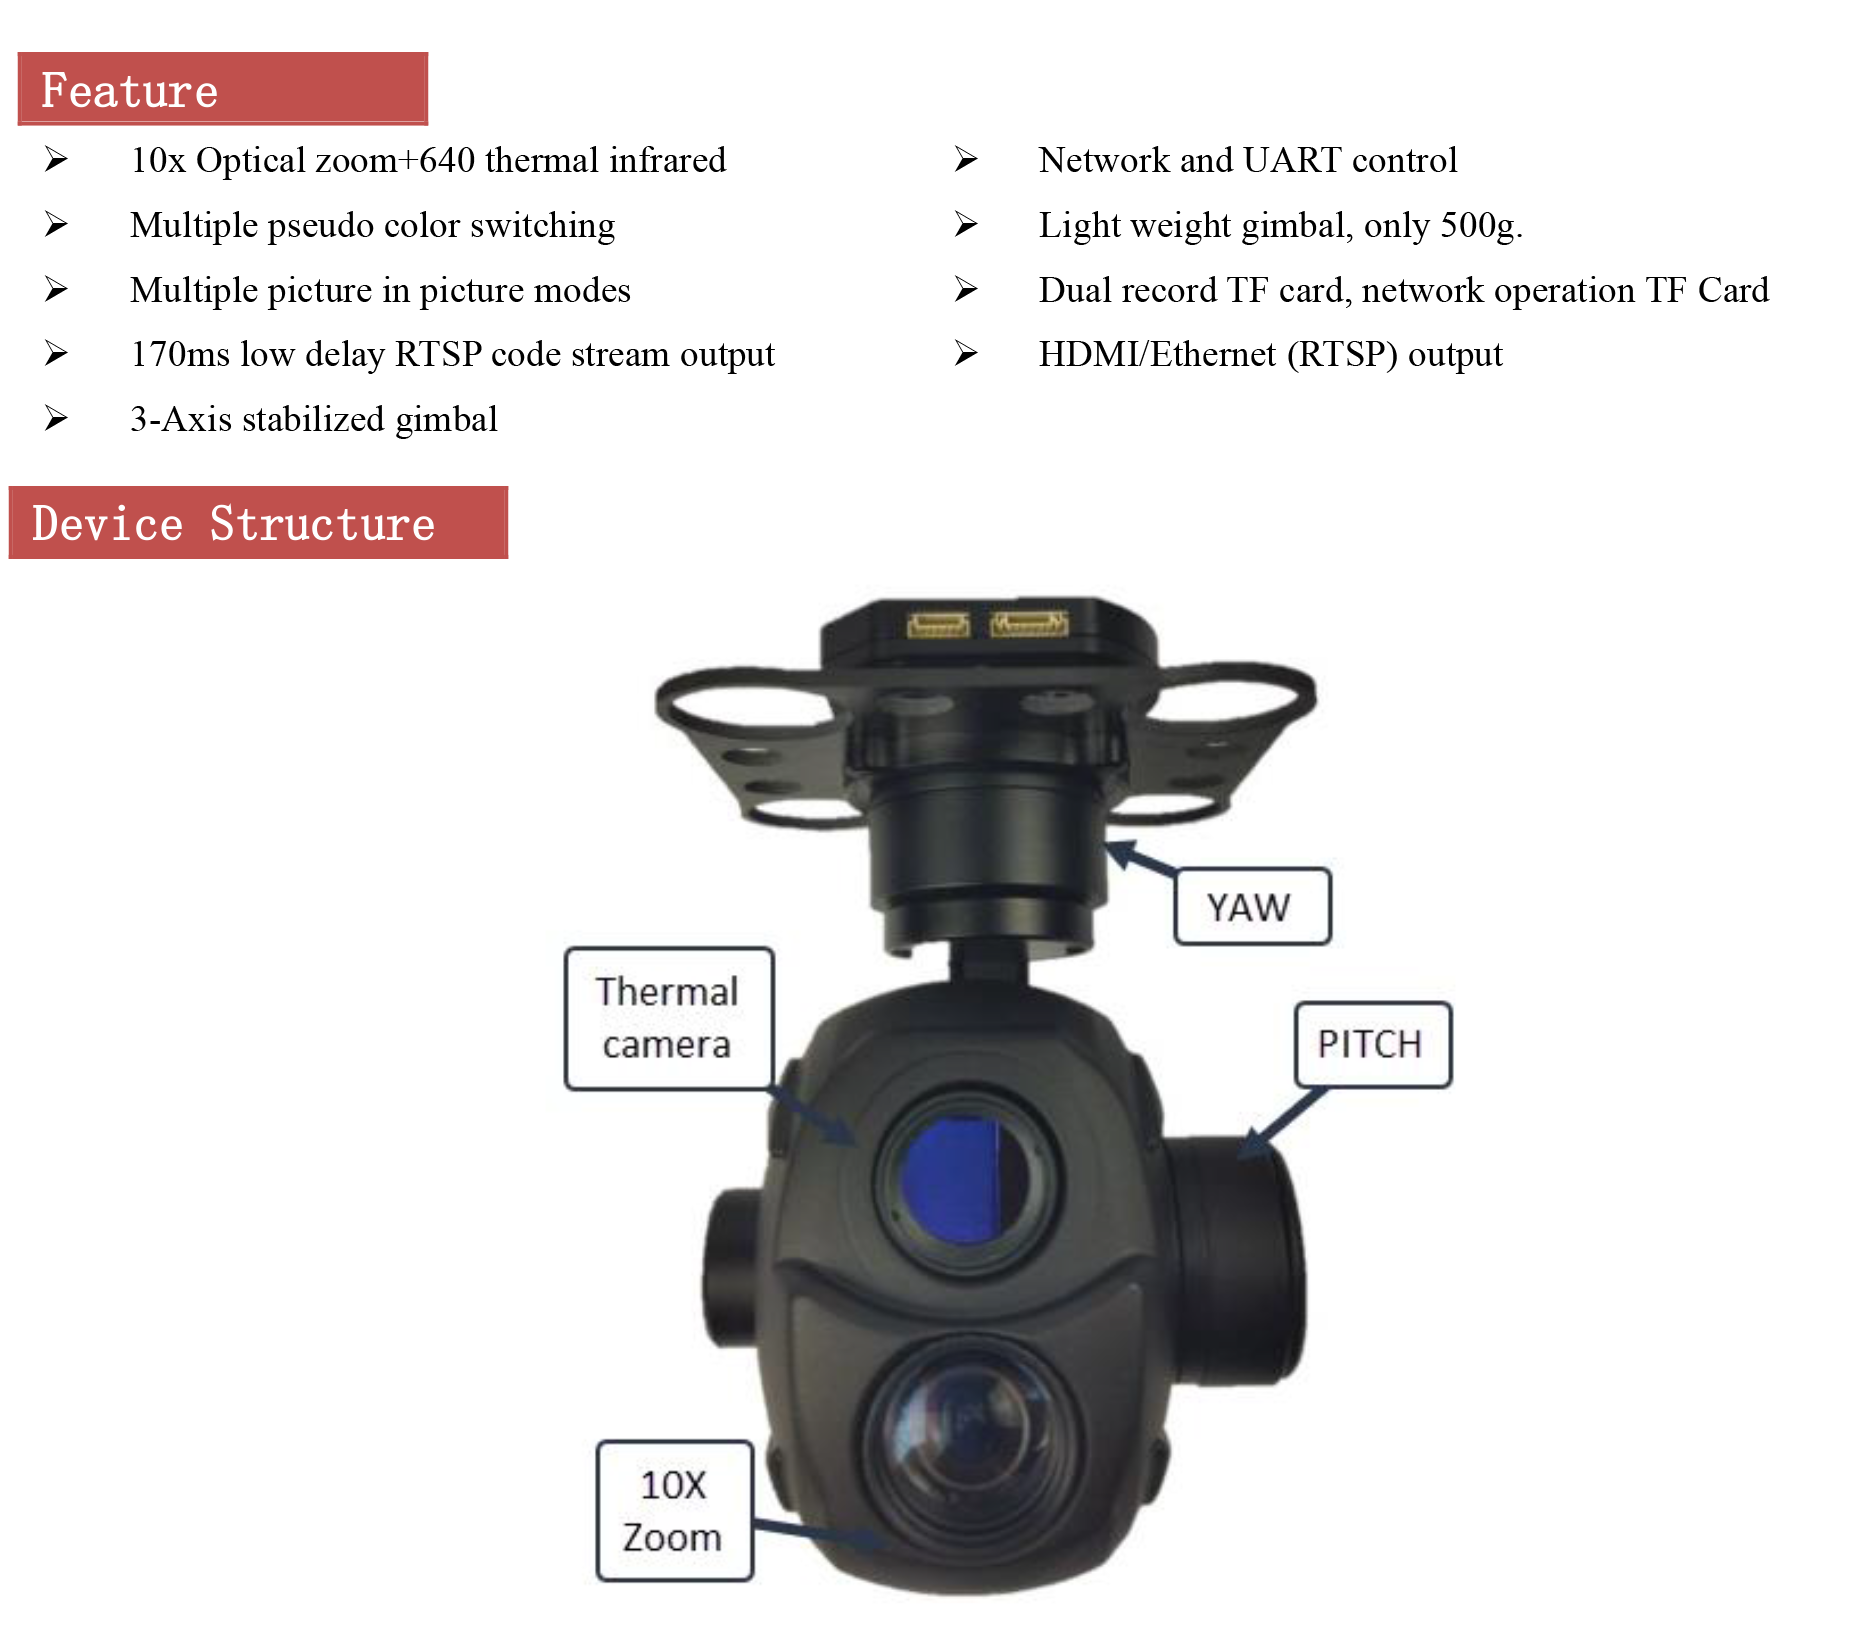 KHP10G613 10x Optical zoom camera + 640*512 thermal camera  Dual light 3-Axis Stabilized Gimbal, IP/HDMI output 